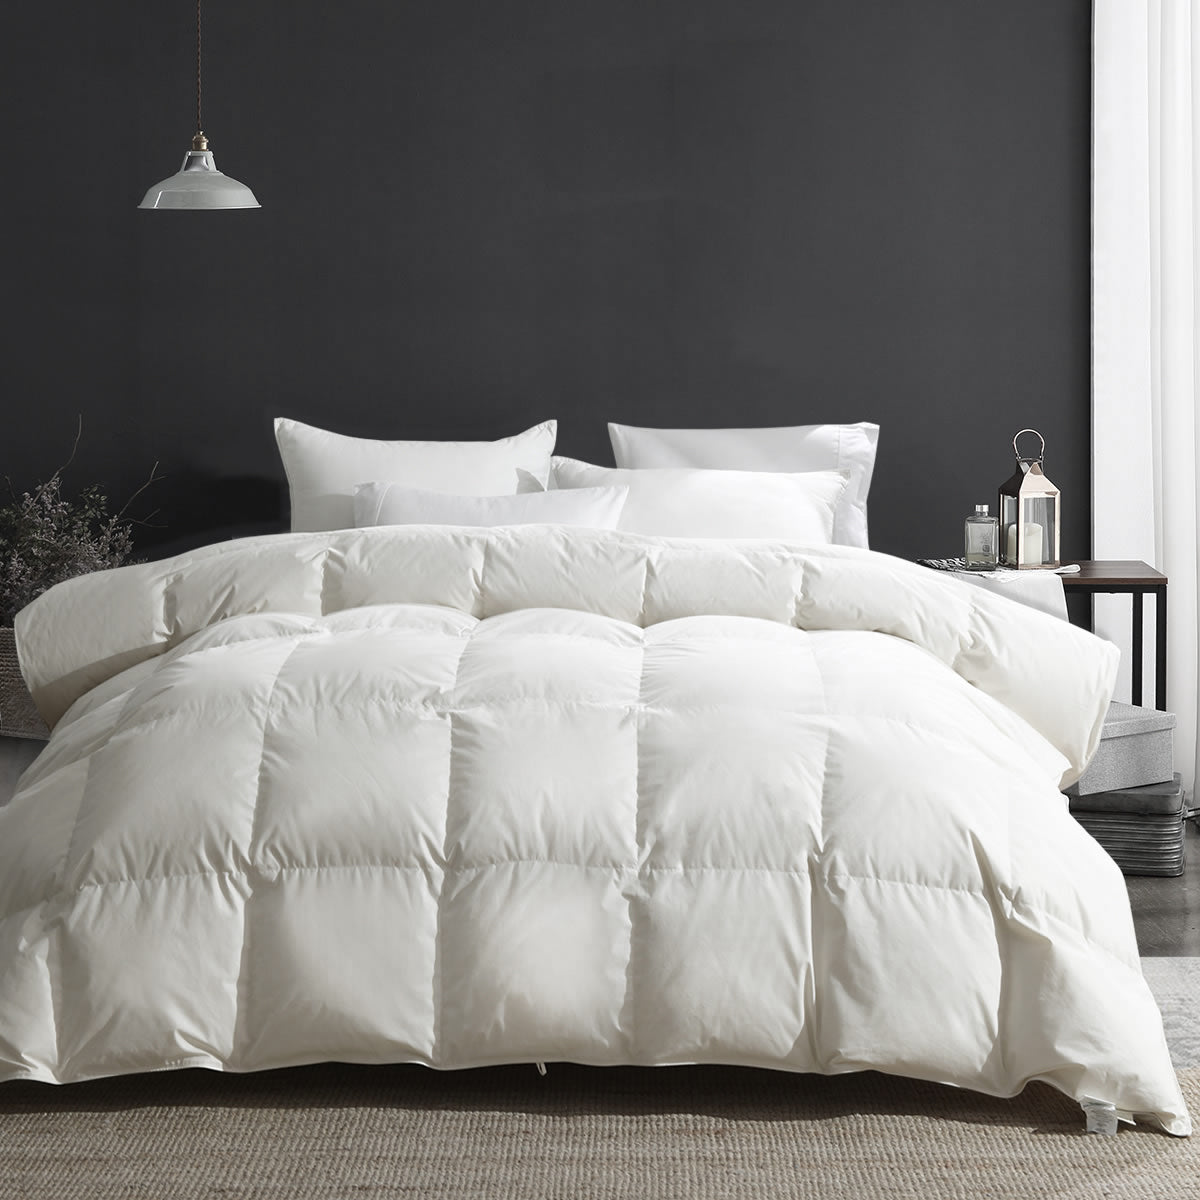 Luxury 100% Organic Cotton Goose Feathers Down Comforter -Lightweight, All-season, and Winter-weight 750FP Down Duvet Insert Available